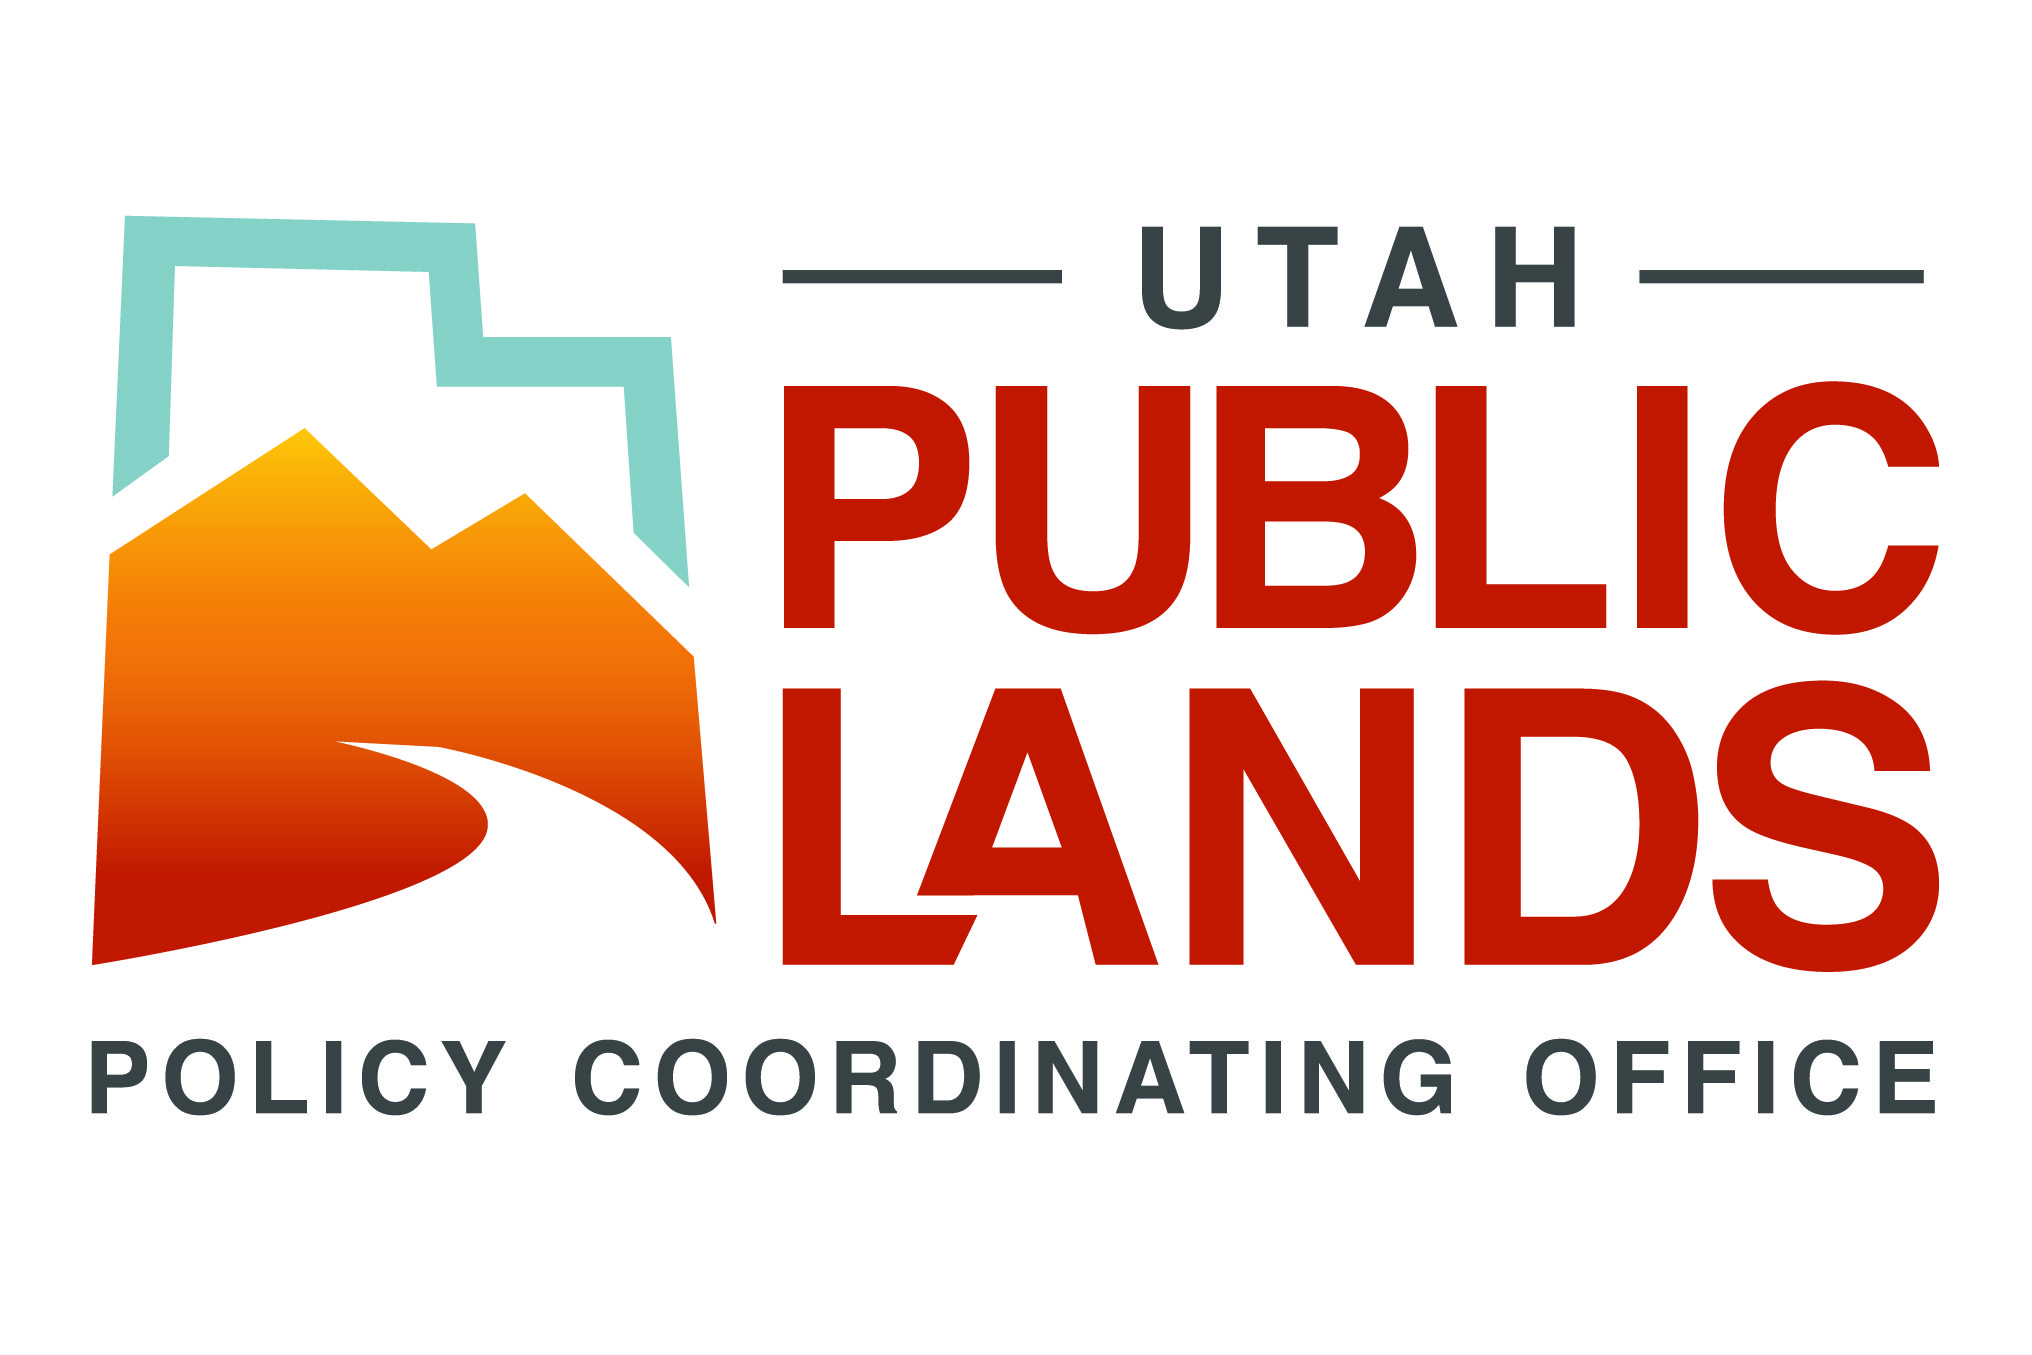 Utah's Public Lands Policy Coordinating Office